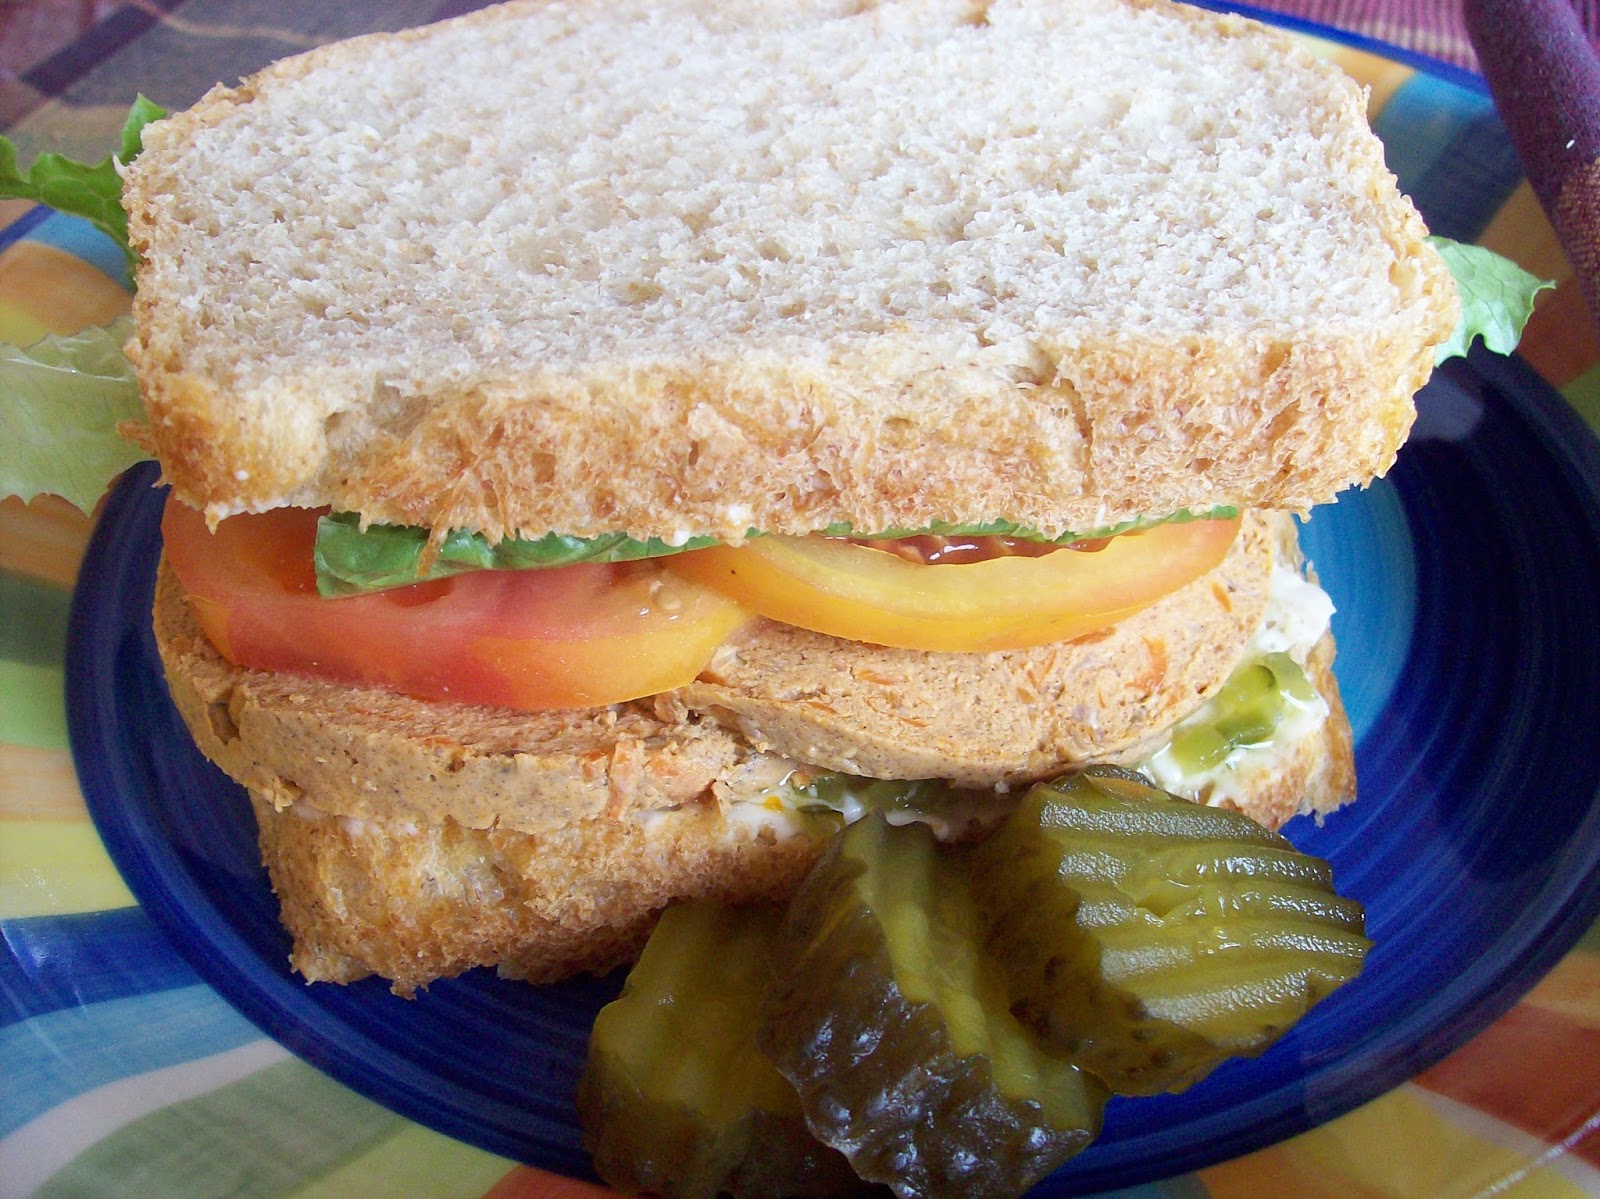 Sandwich Deli Loaf in a sandwich of whole wheat bread, lettuce, tomatoes and pickles.